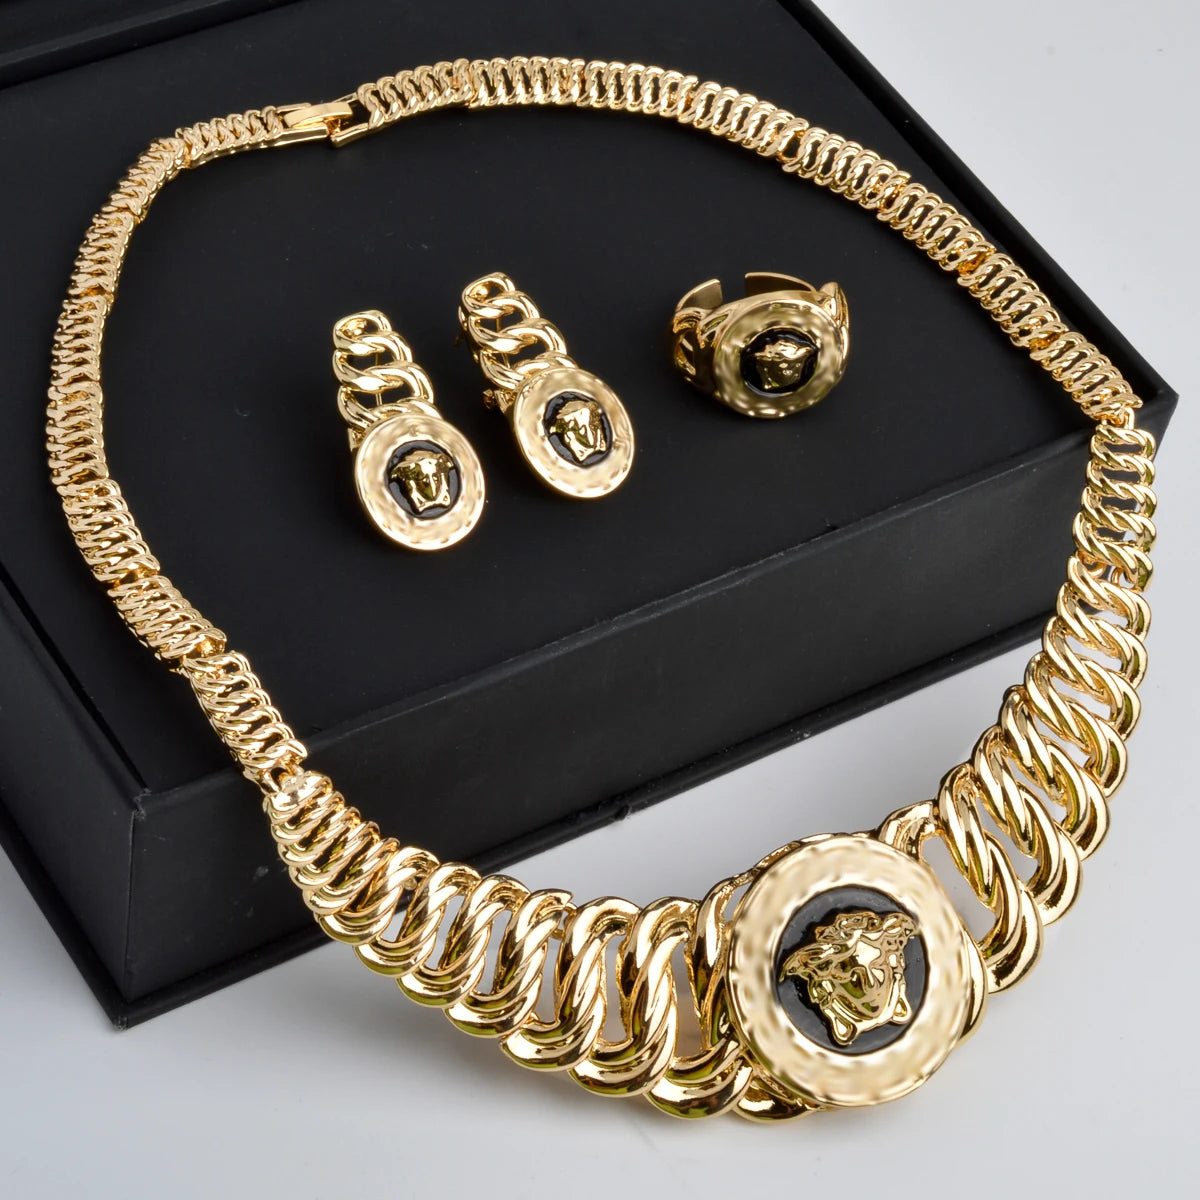 Dubai Luxury Jewelry Set for Women Gold Plated Lion Necklace